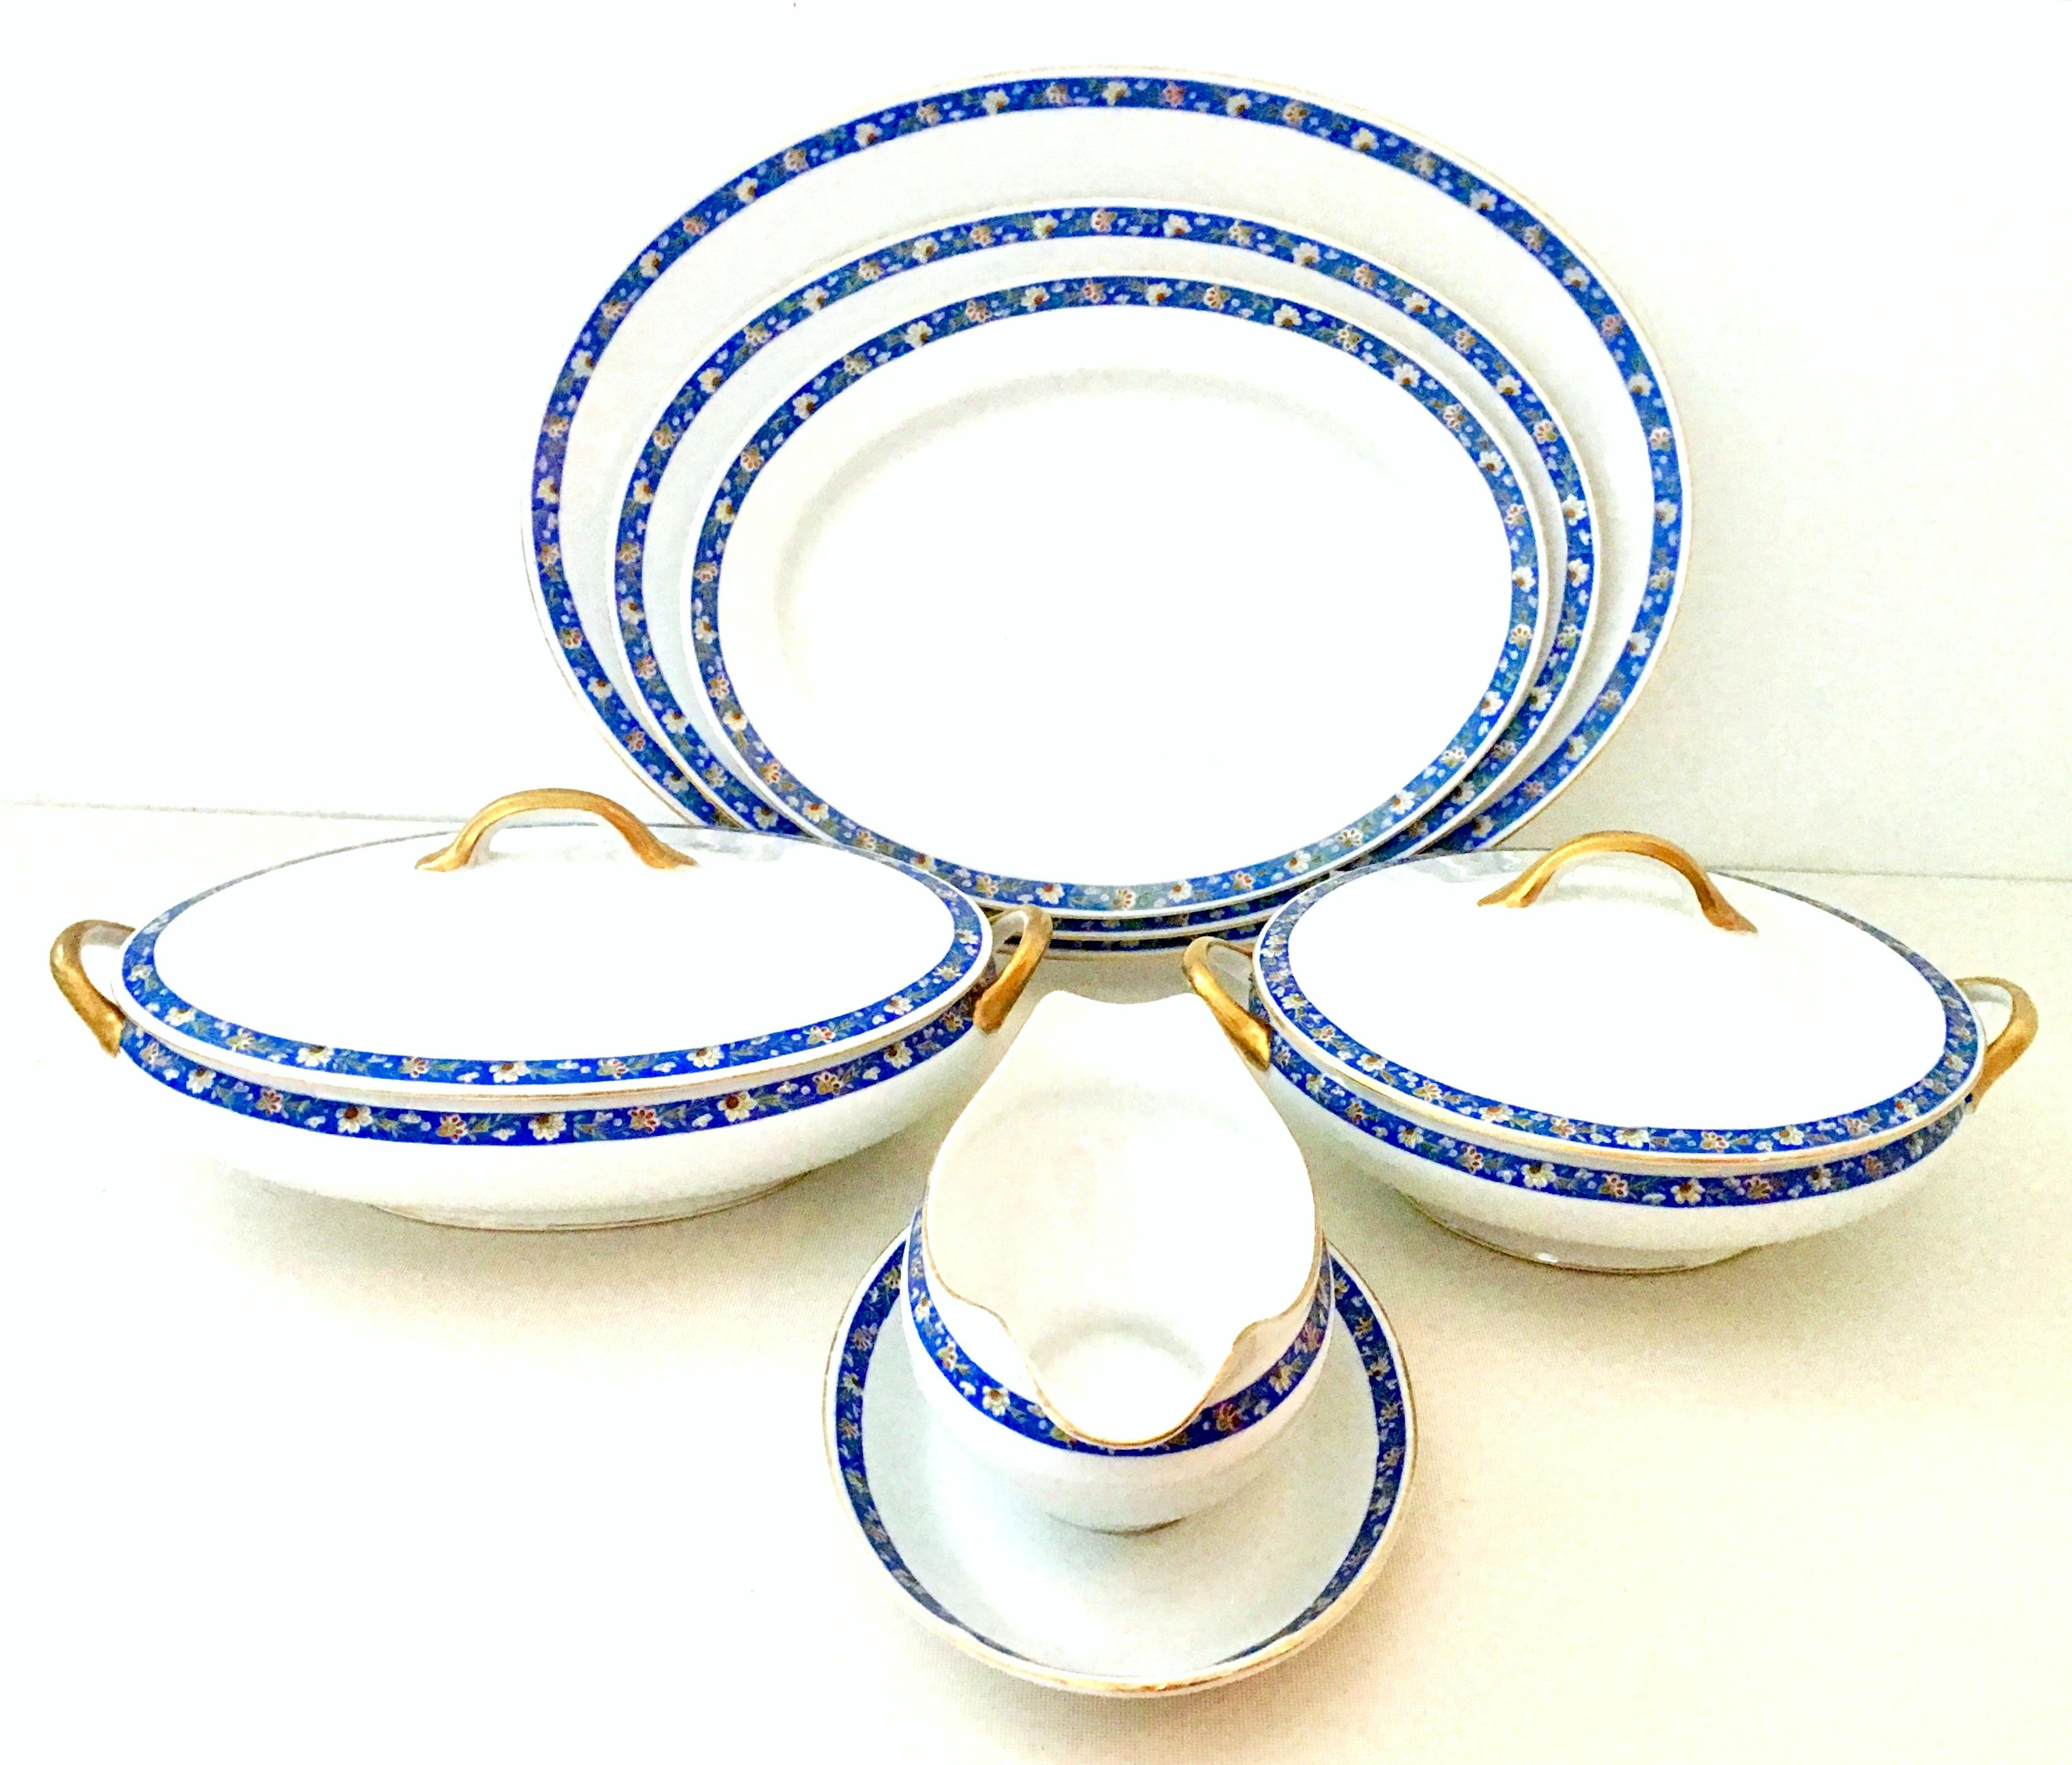 1930'S Japanese hand-painted porcelain blue & white serving piece set by, Morimura Brother-Noritake Set Of Eight Pieces.. the Brentwood pattern features  a bright white ground with a vivid blue, yellow, green and red floral motif edge and 22-karat